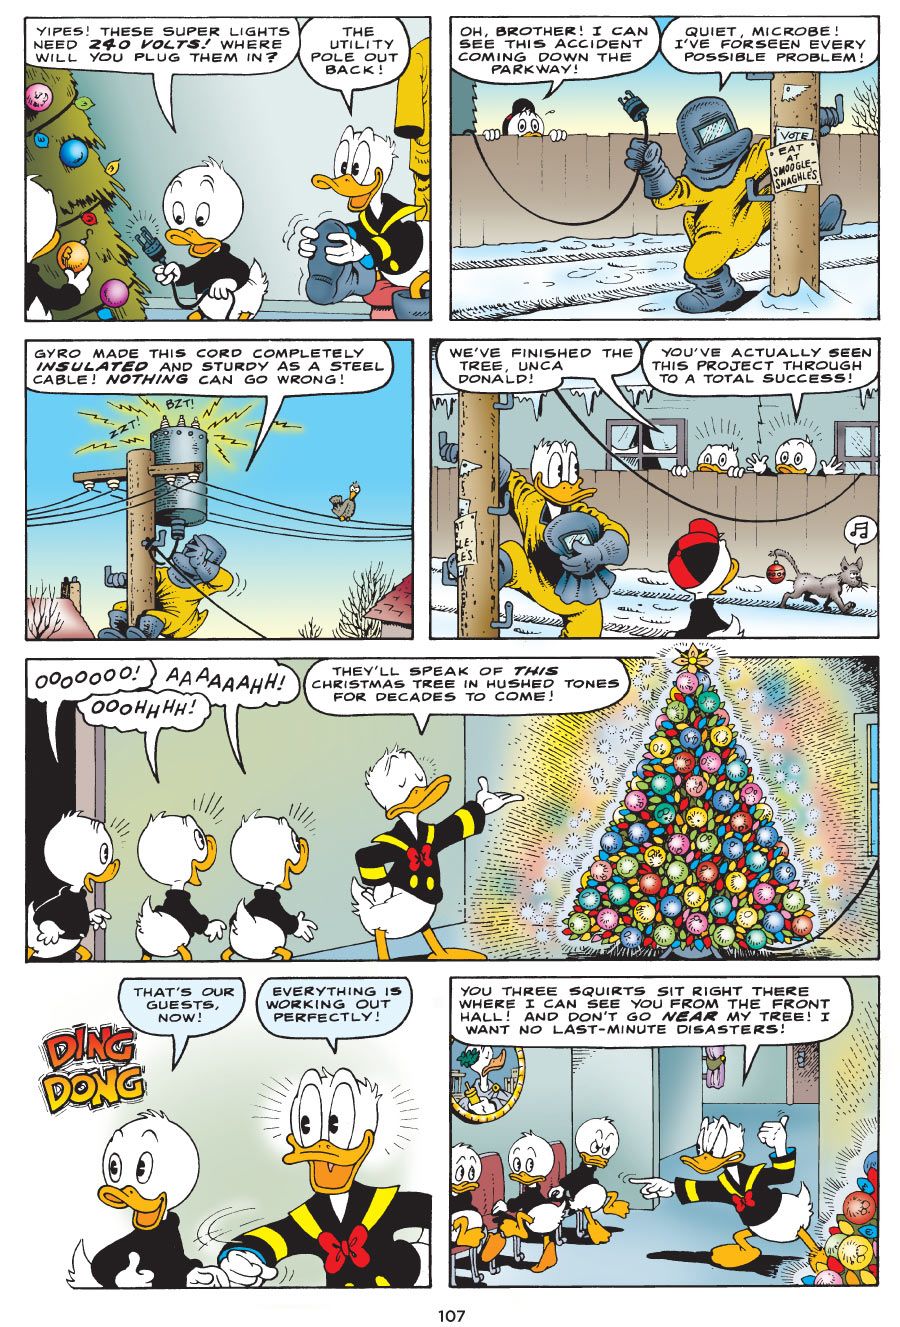 Legendary Uncle Scrooge Artist Rosa Builds A Library In Duckburg